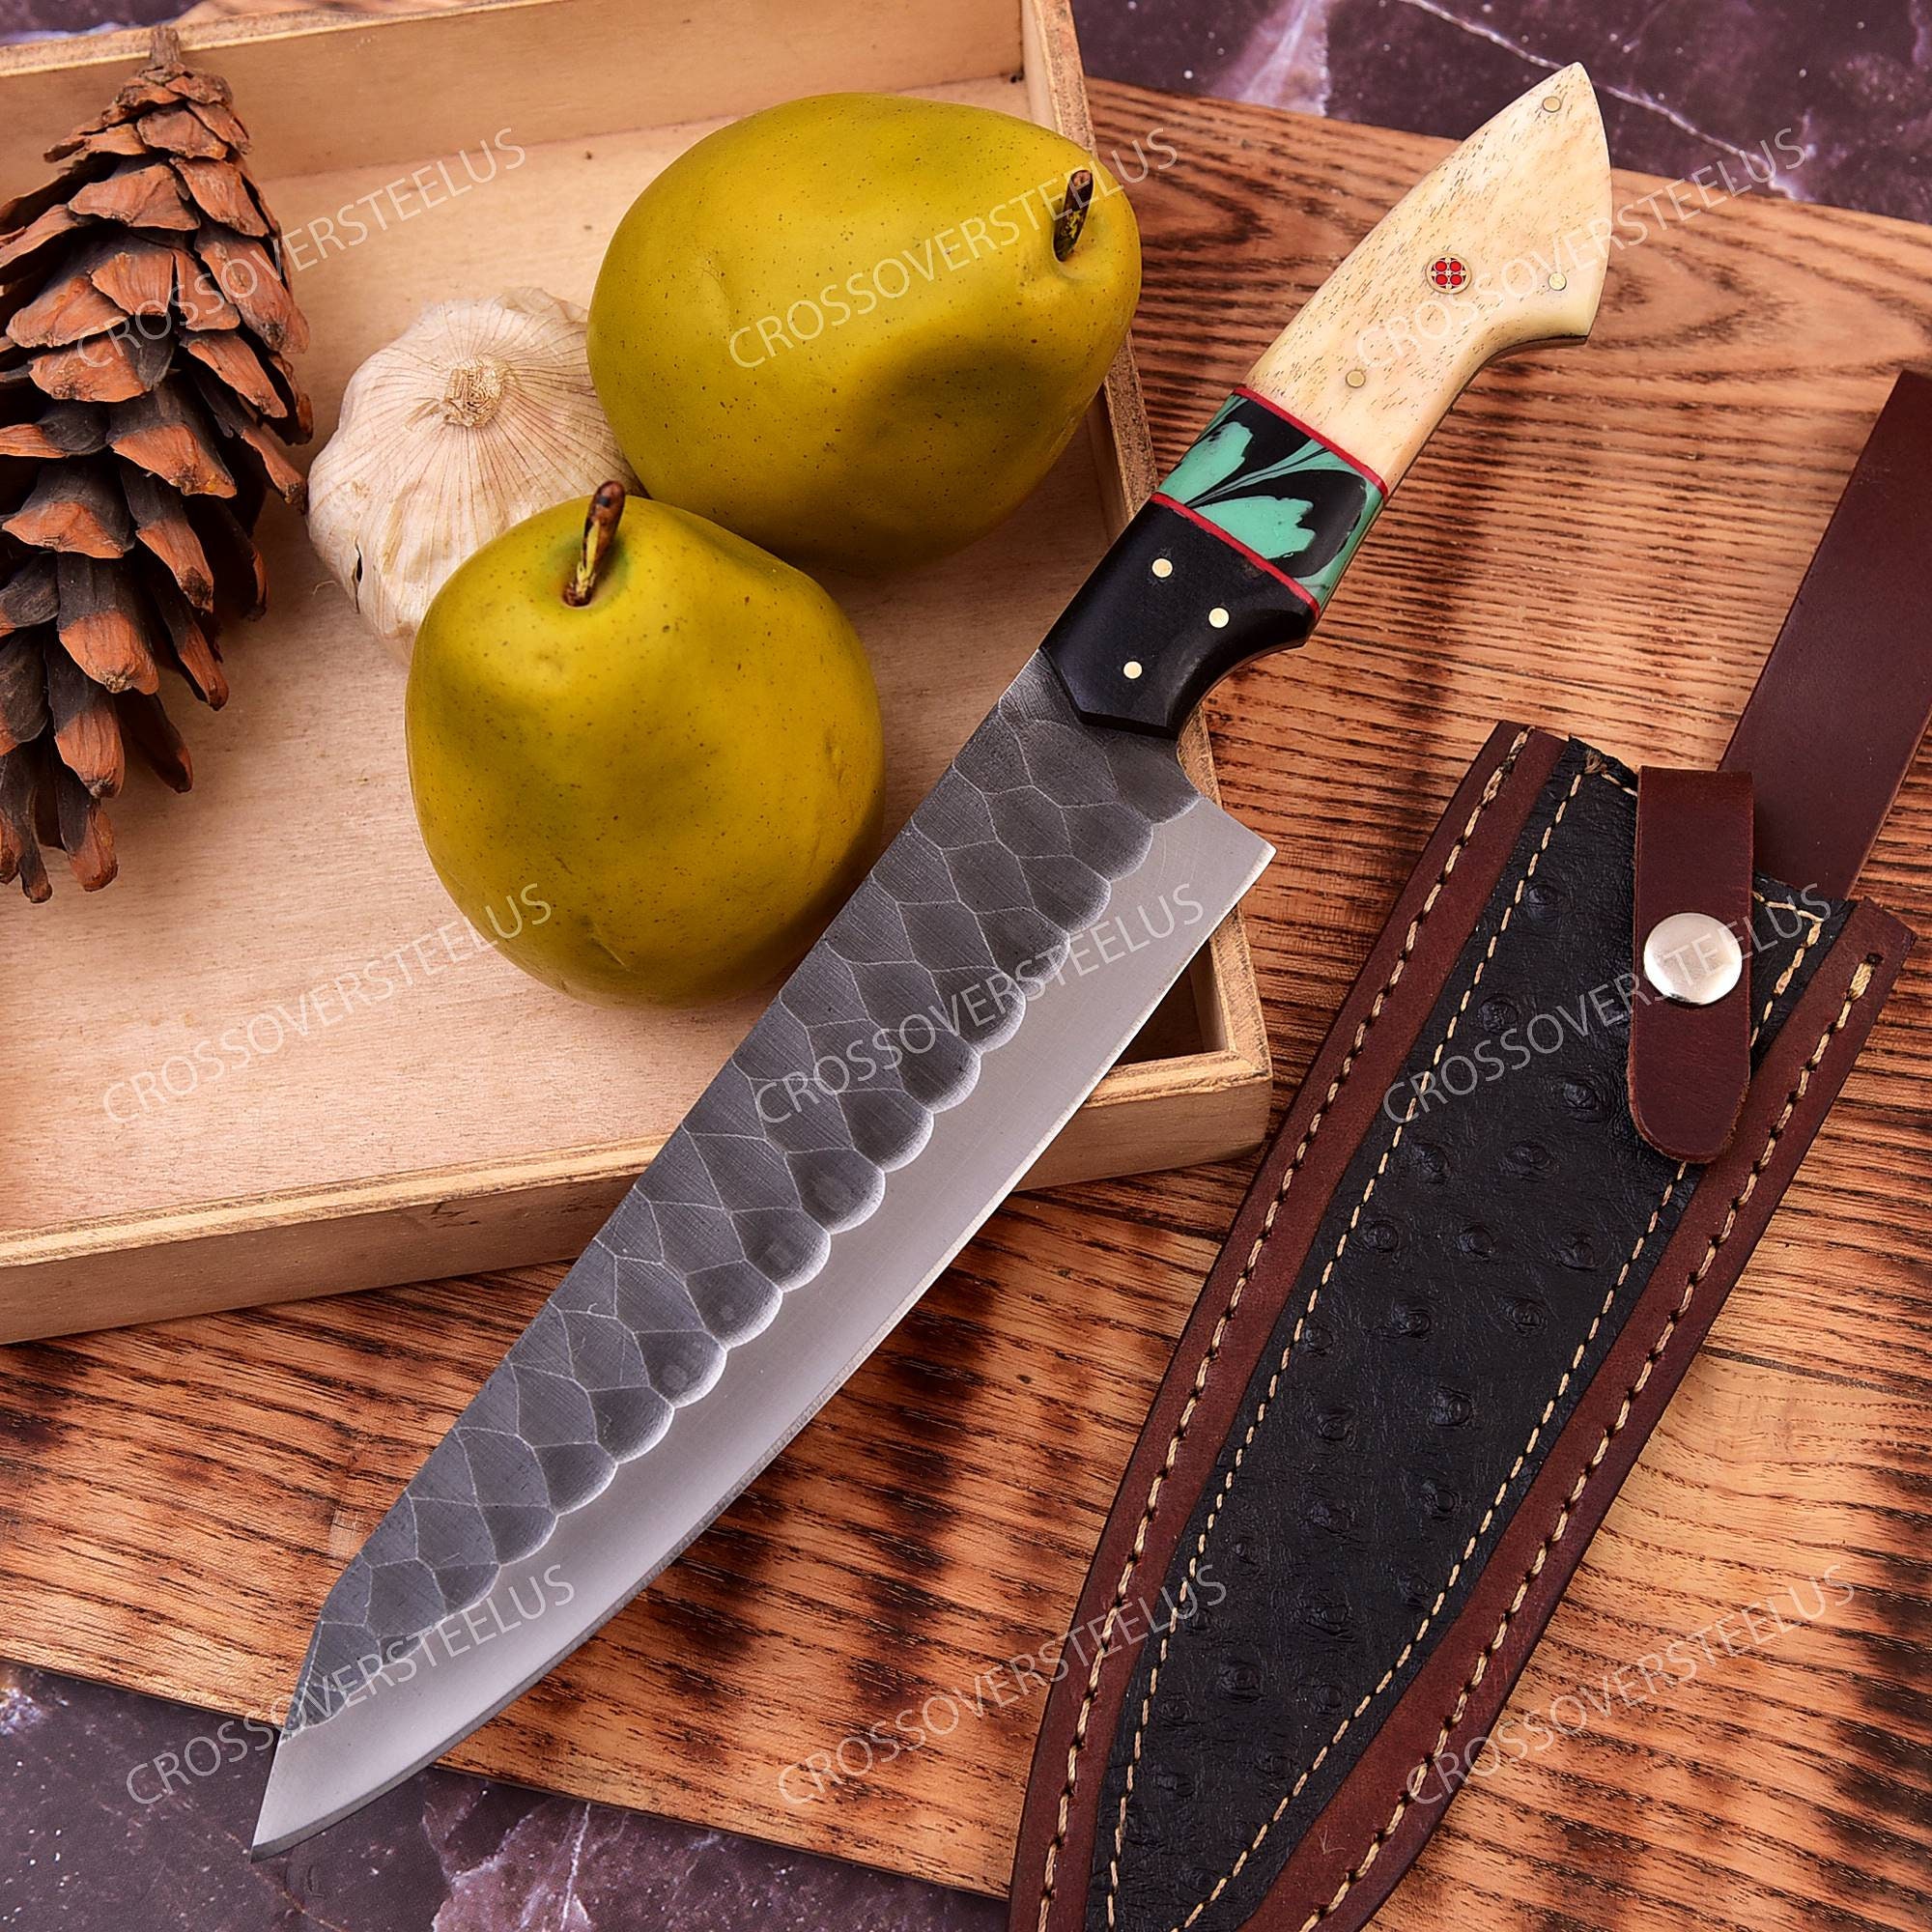 Middia Best 4.5 Inch Ceramic Kitchen Fruit Knife with Cover - China Kitchen  Carving Knives, Camping Knife